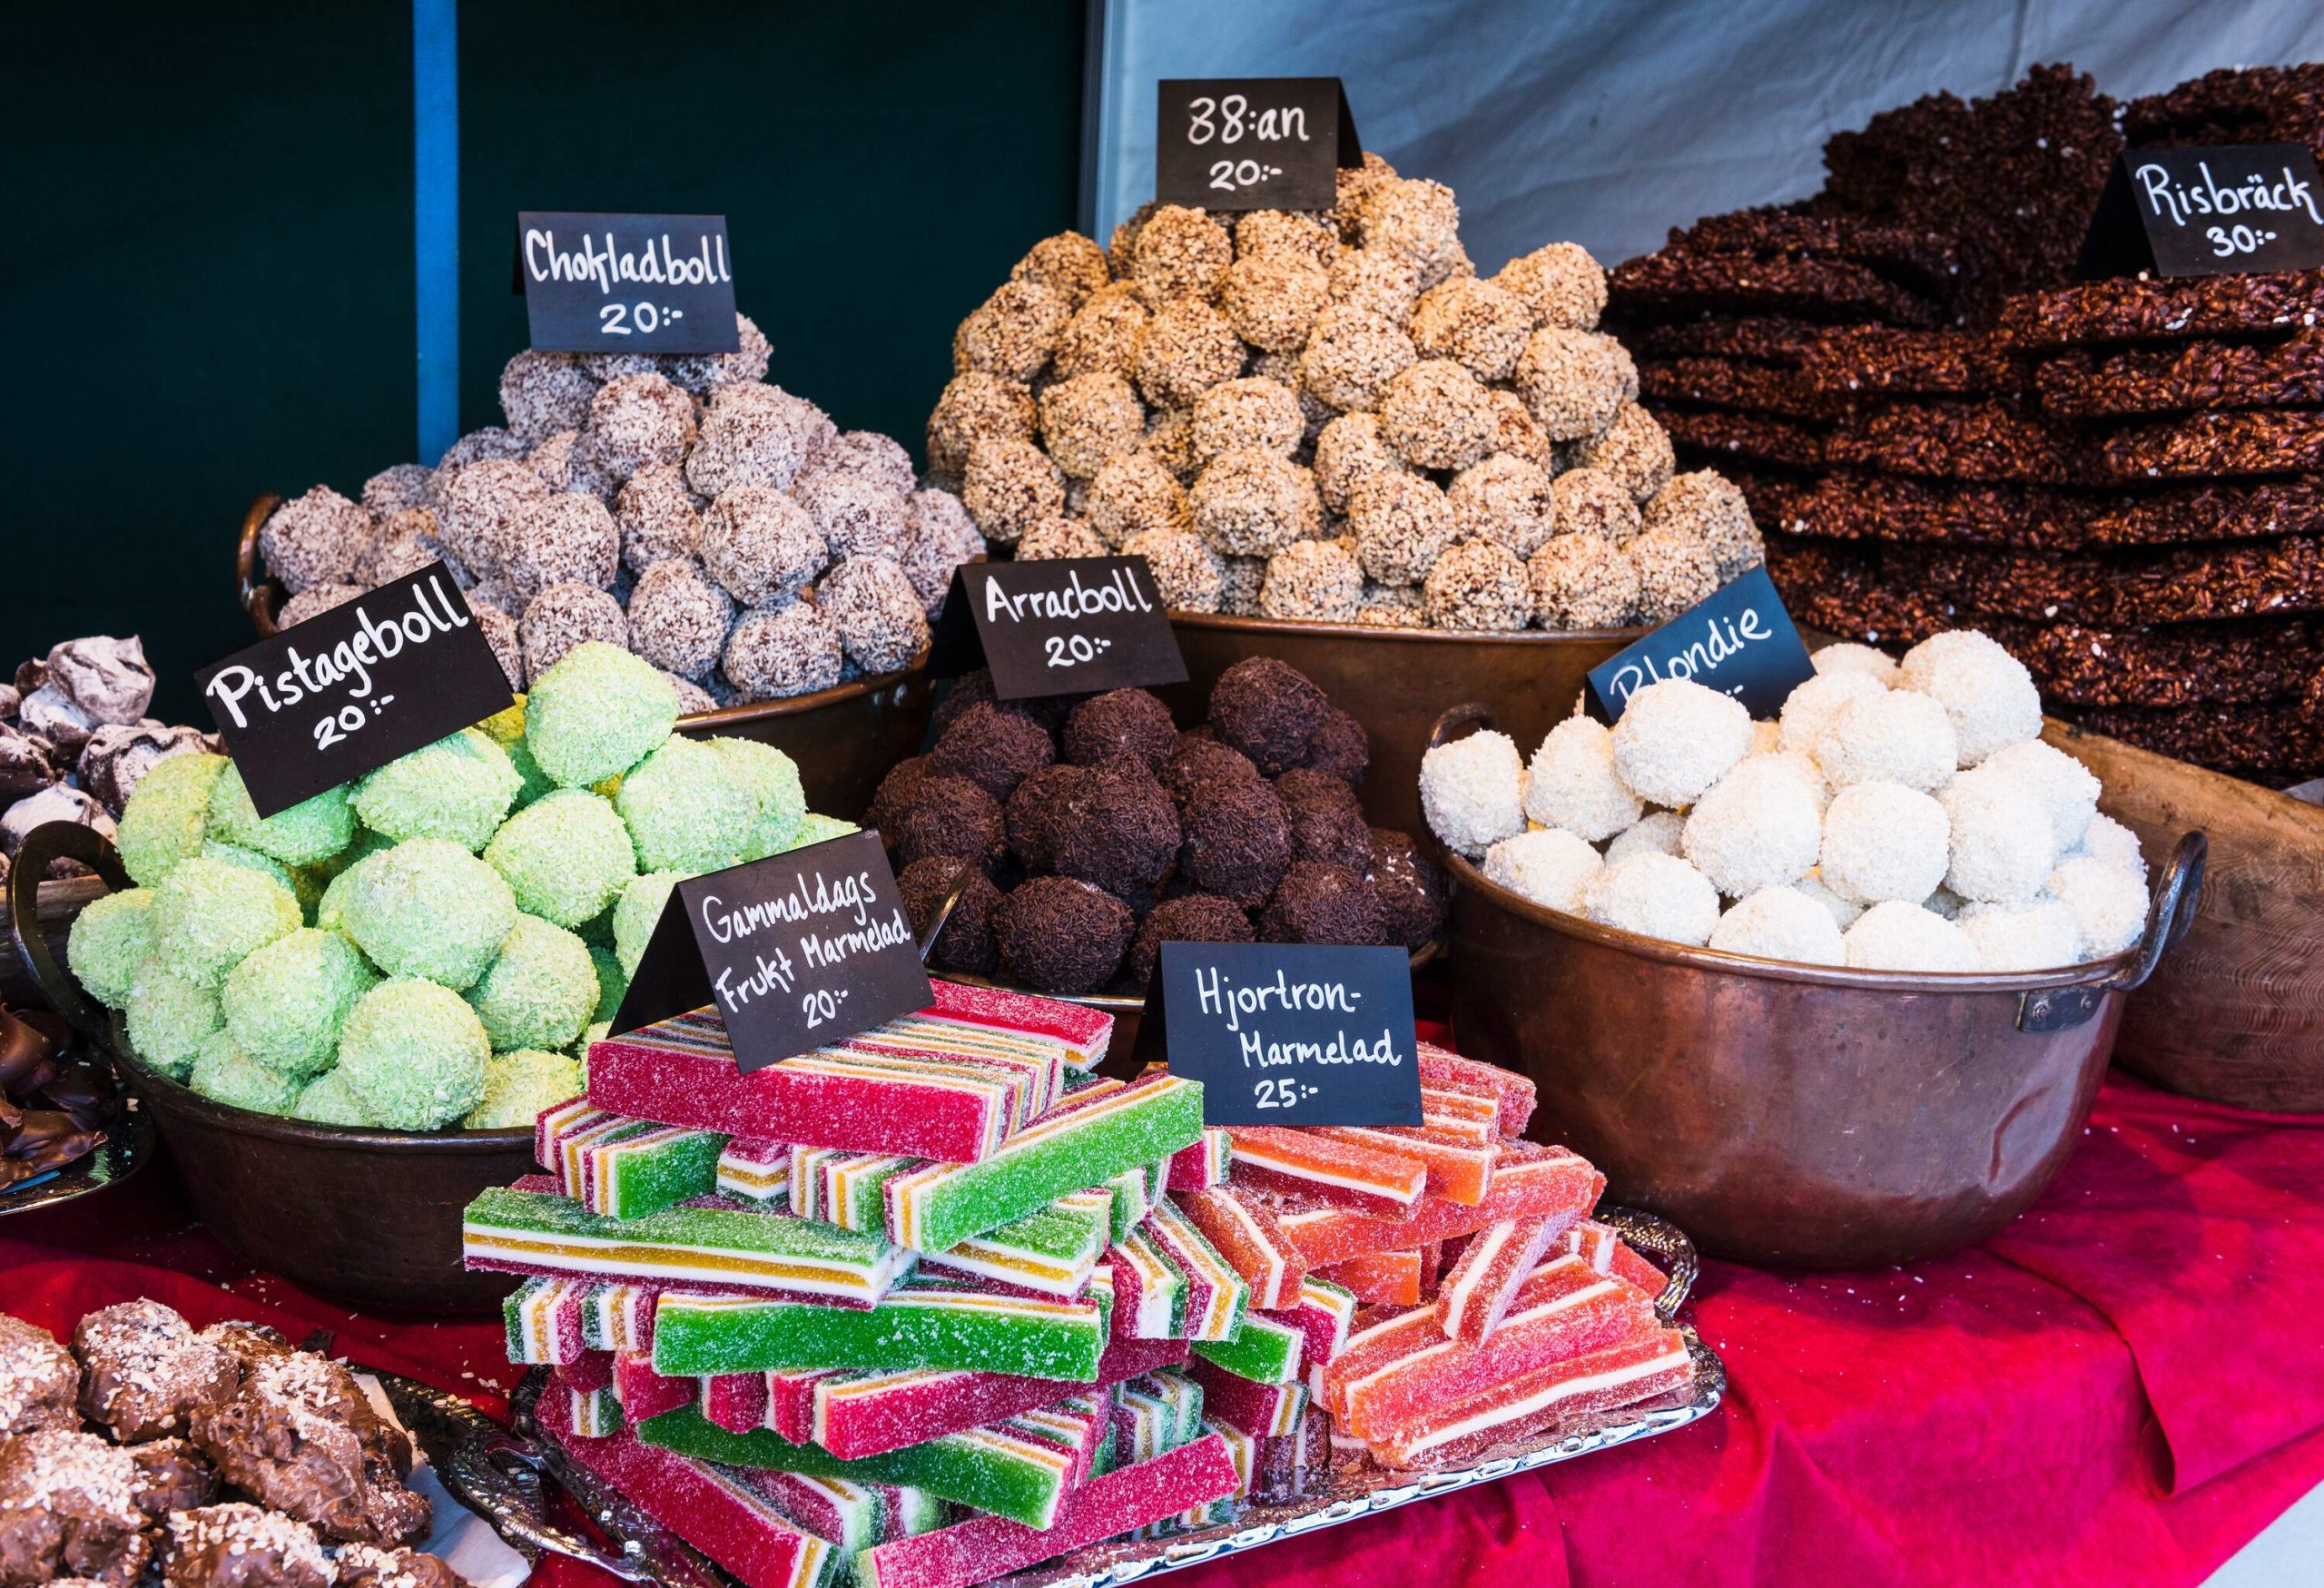 Different candies and sweets are displayed on the market for sale.